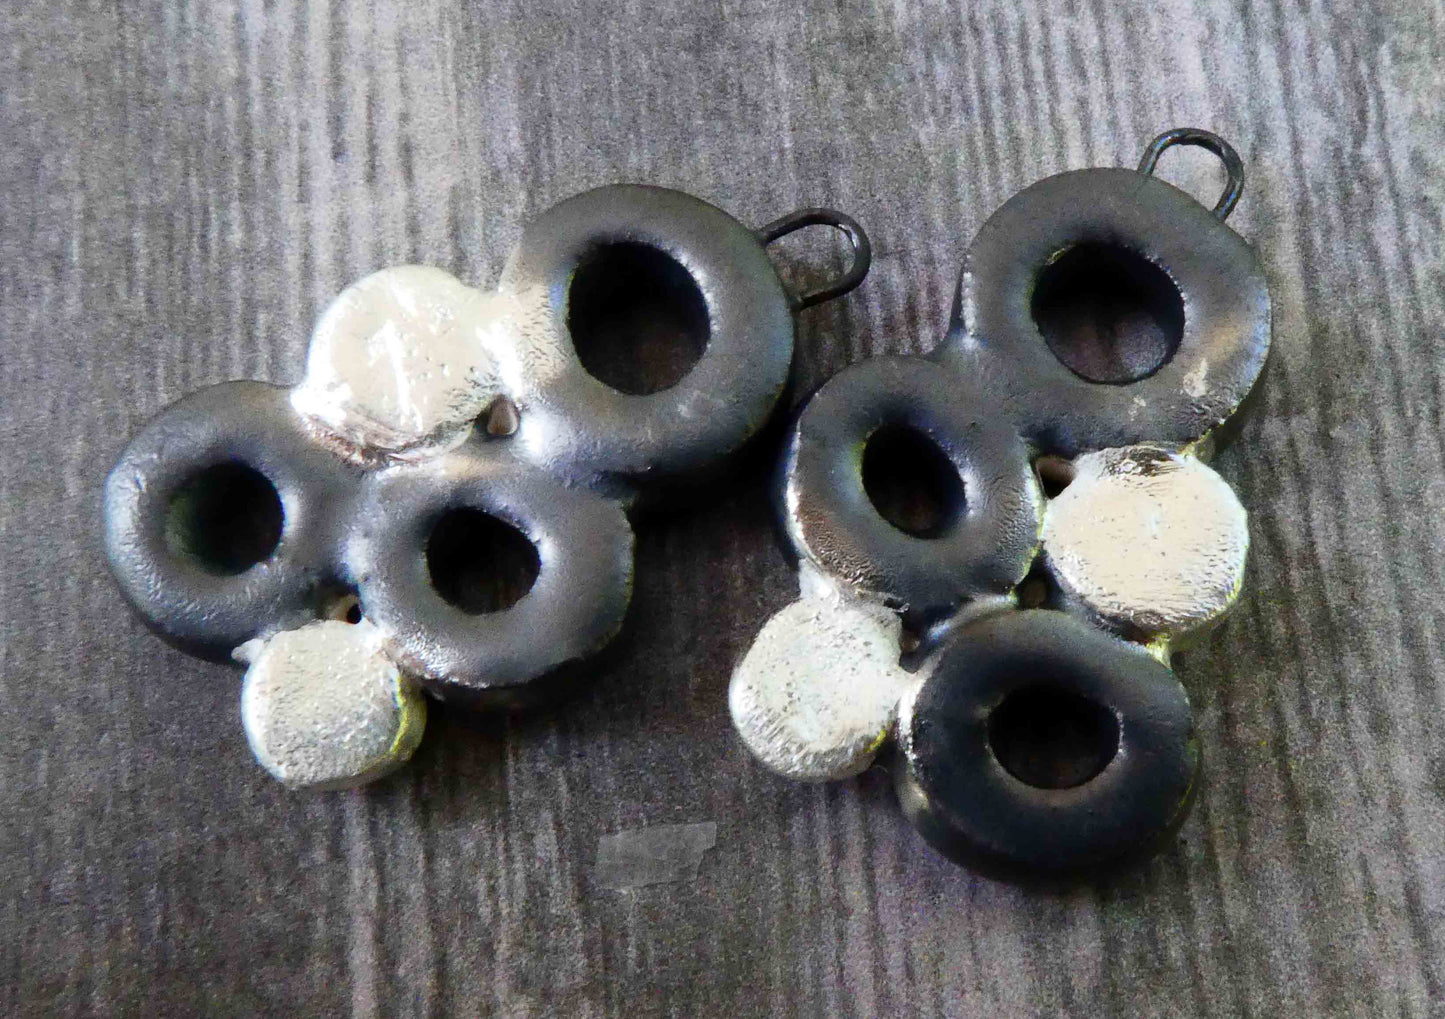 Ceramic Three Hoop Earring Charms -Pewter and Silver